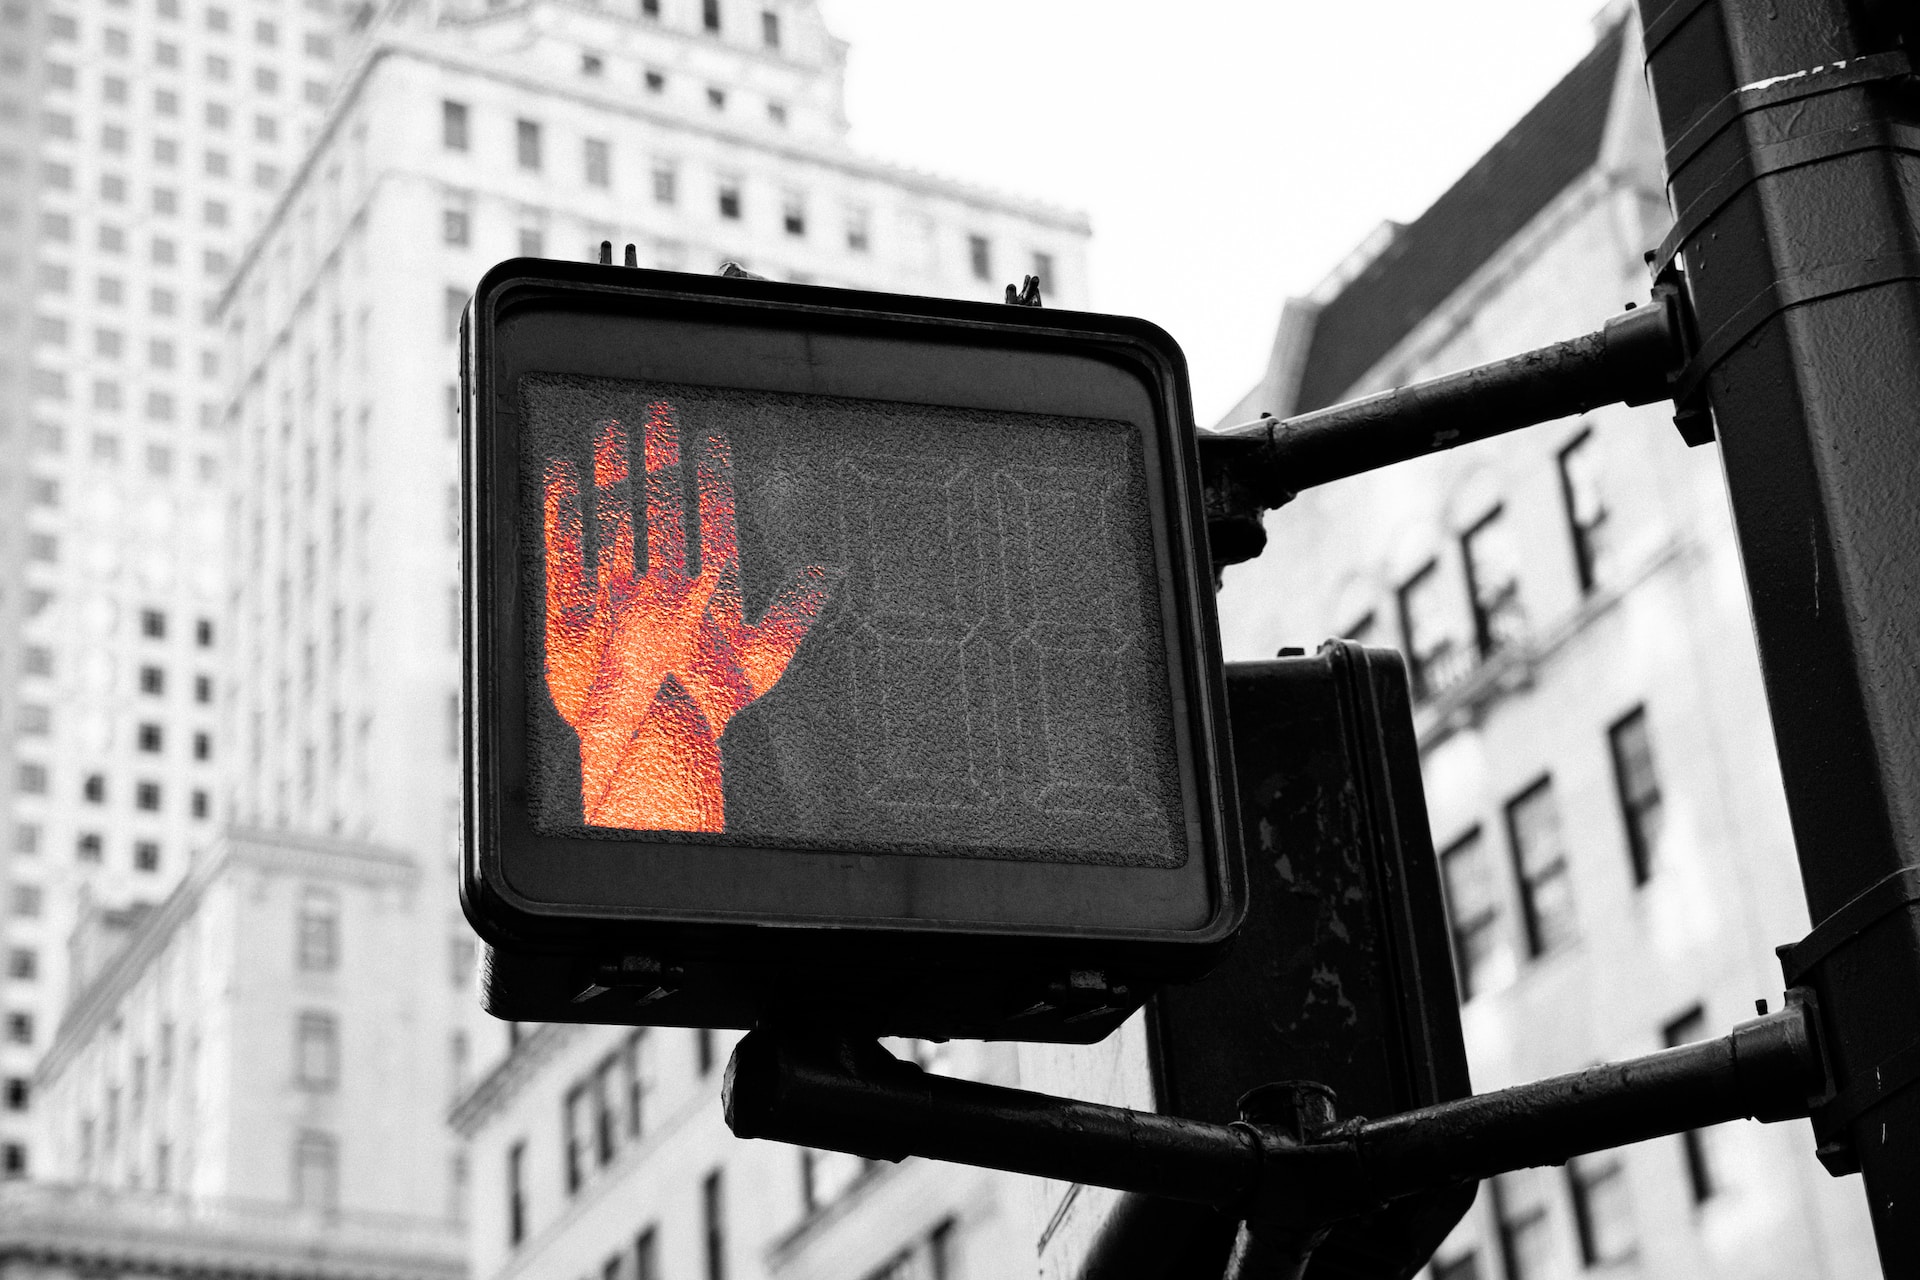 Description: the orange hand of a 'do not walk' sign.  The gray buildings in the background are slightly out of focus. Photo by Kai Pilger on Unsplash